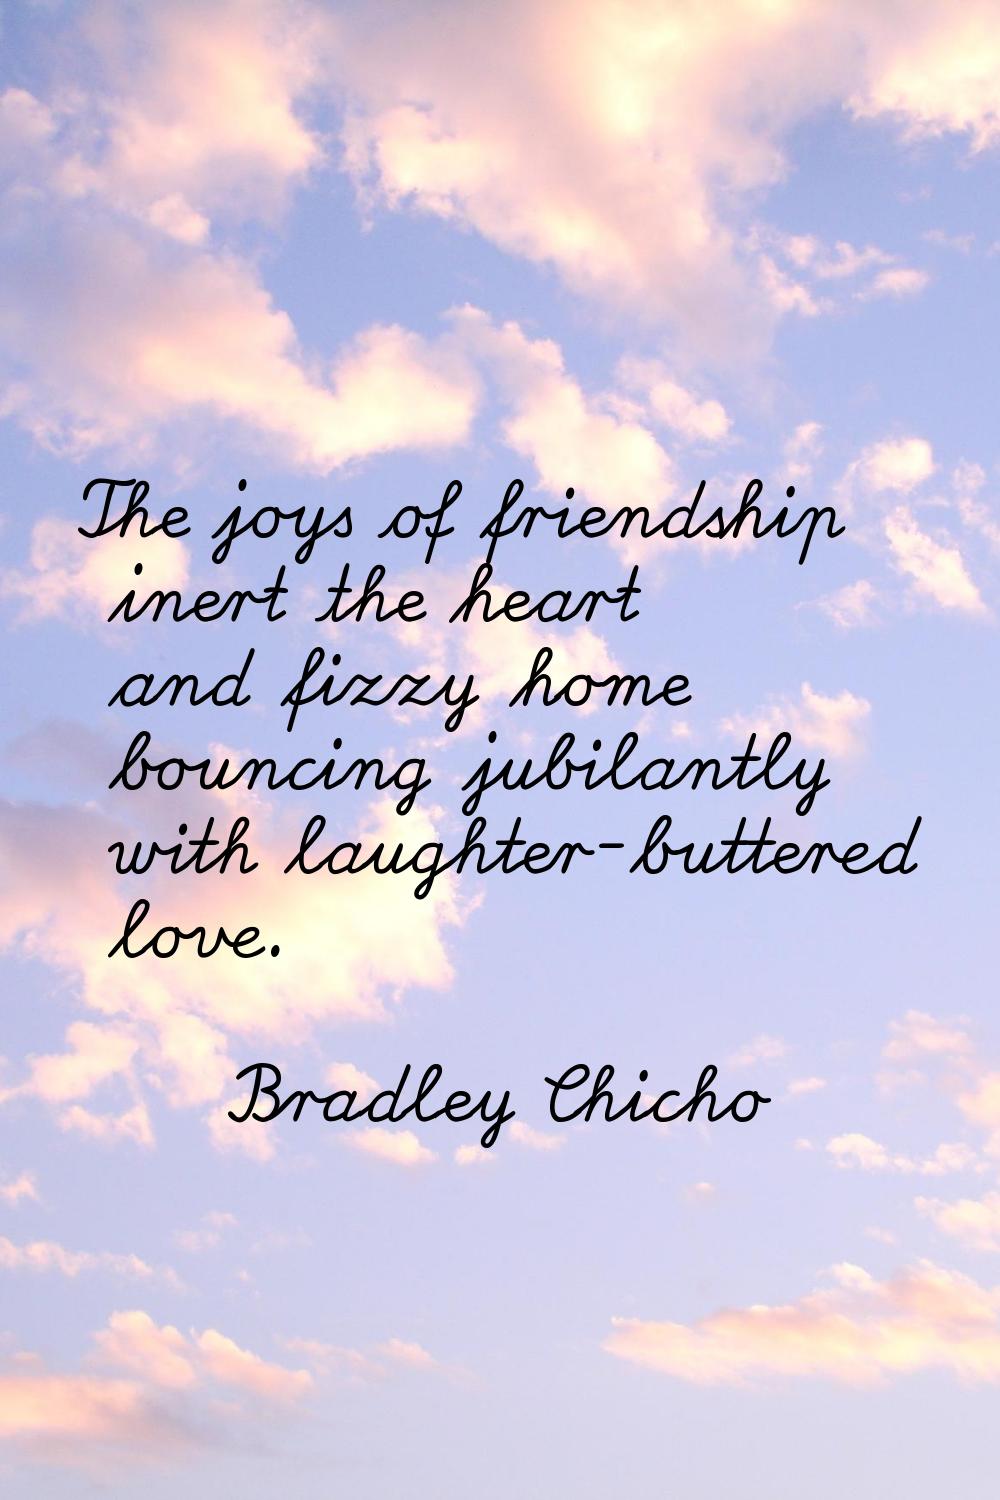 The joys of friendship inert the heart and fizzy home bouncing jubilantly with laughter-buttered lo